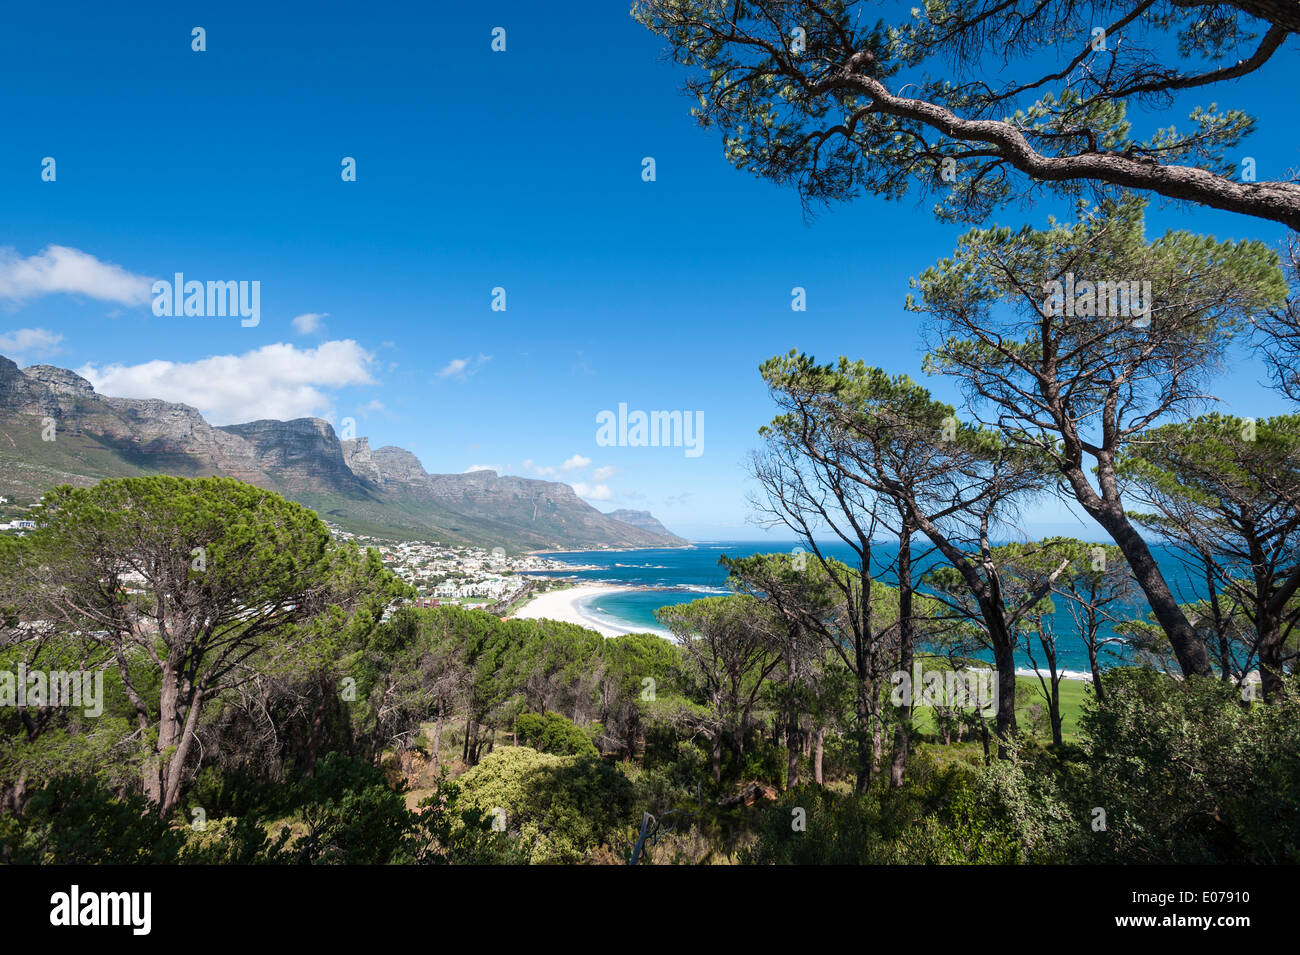 Table Mountain Twelve Apostles and Camps Bay, view from Kloof Road, Cape Town, South Africa Stock Photo